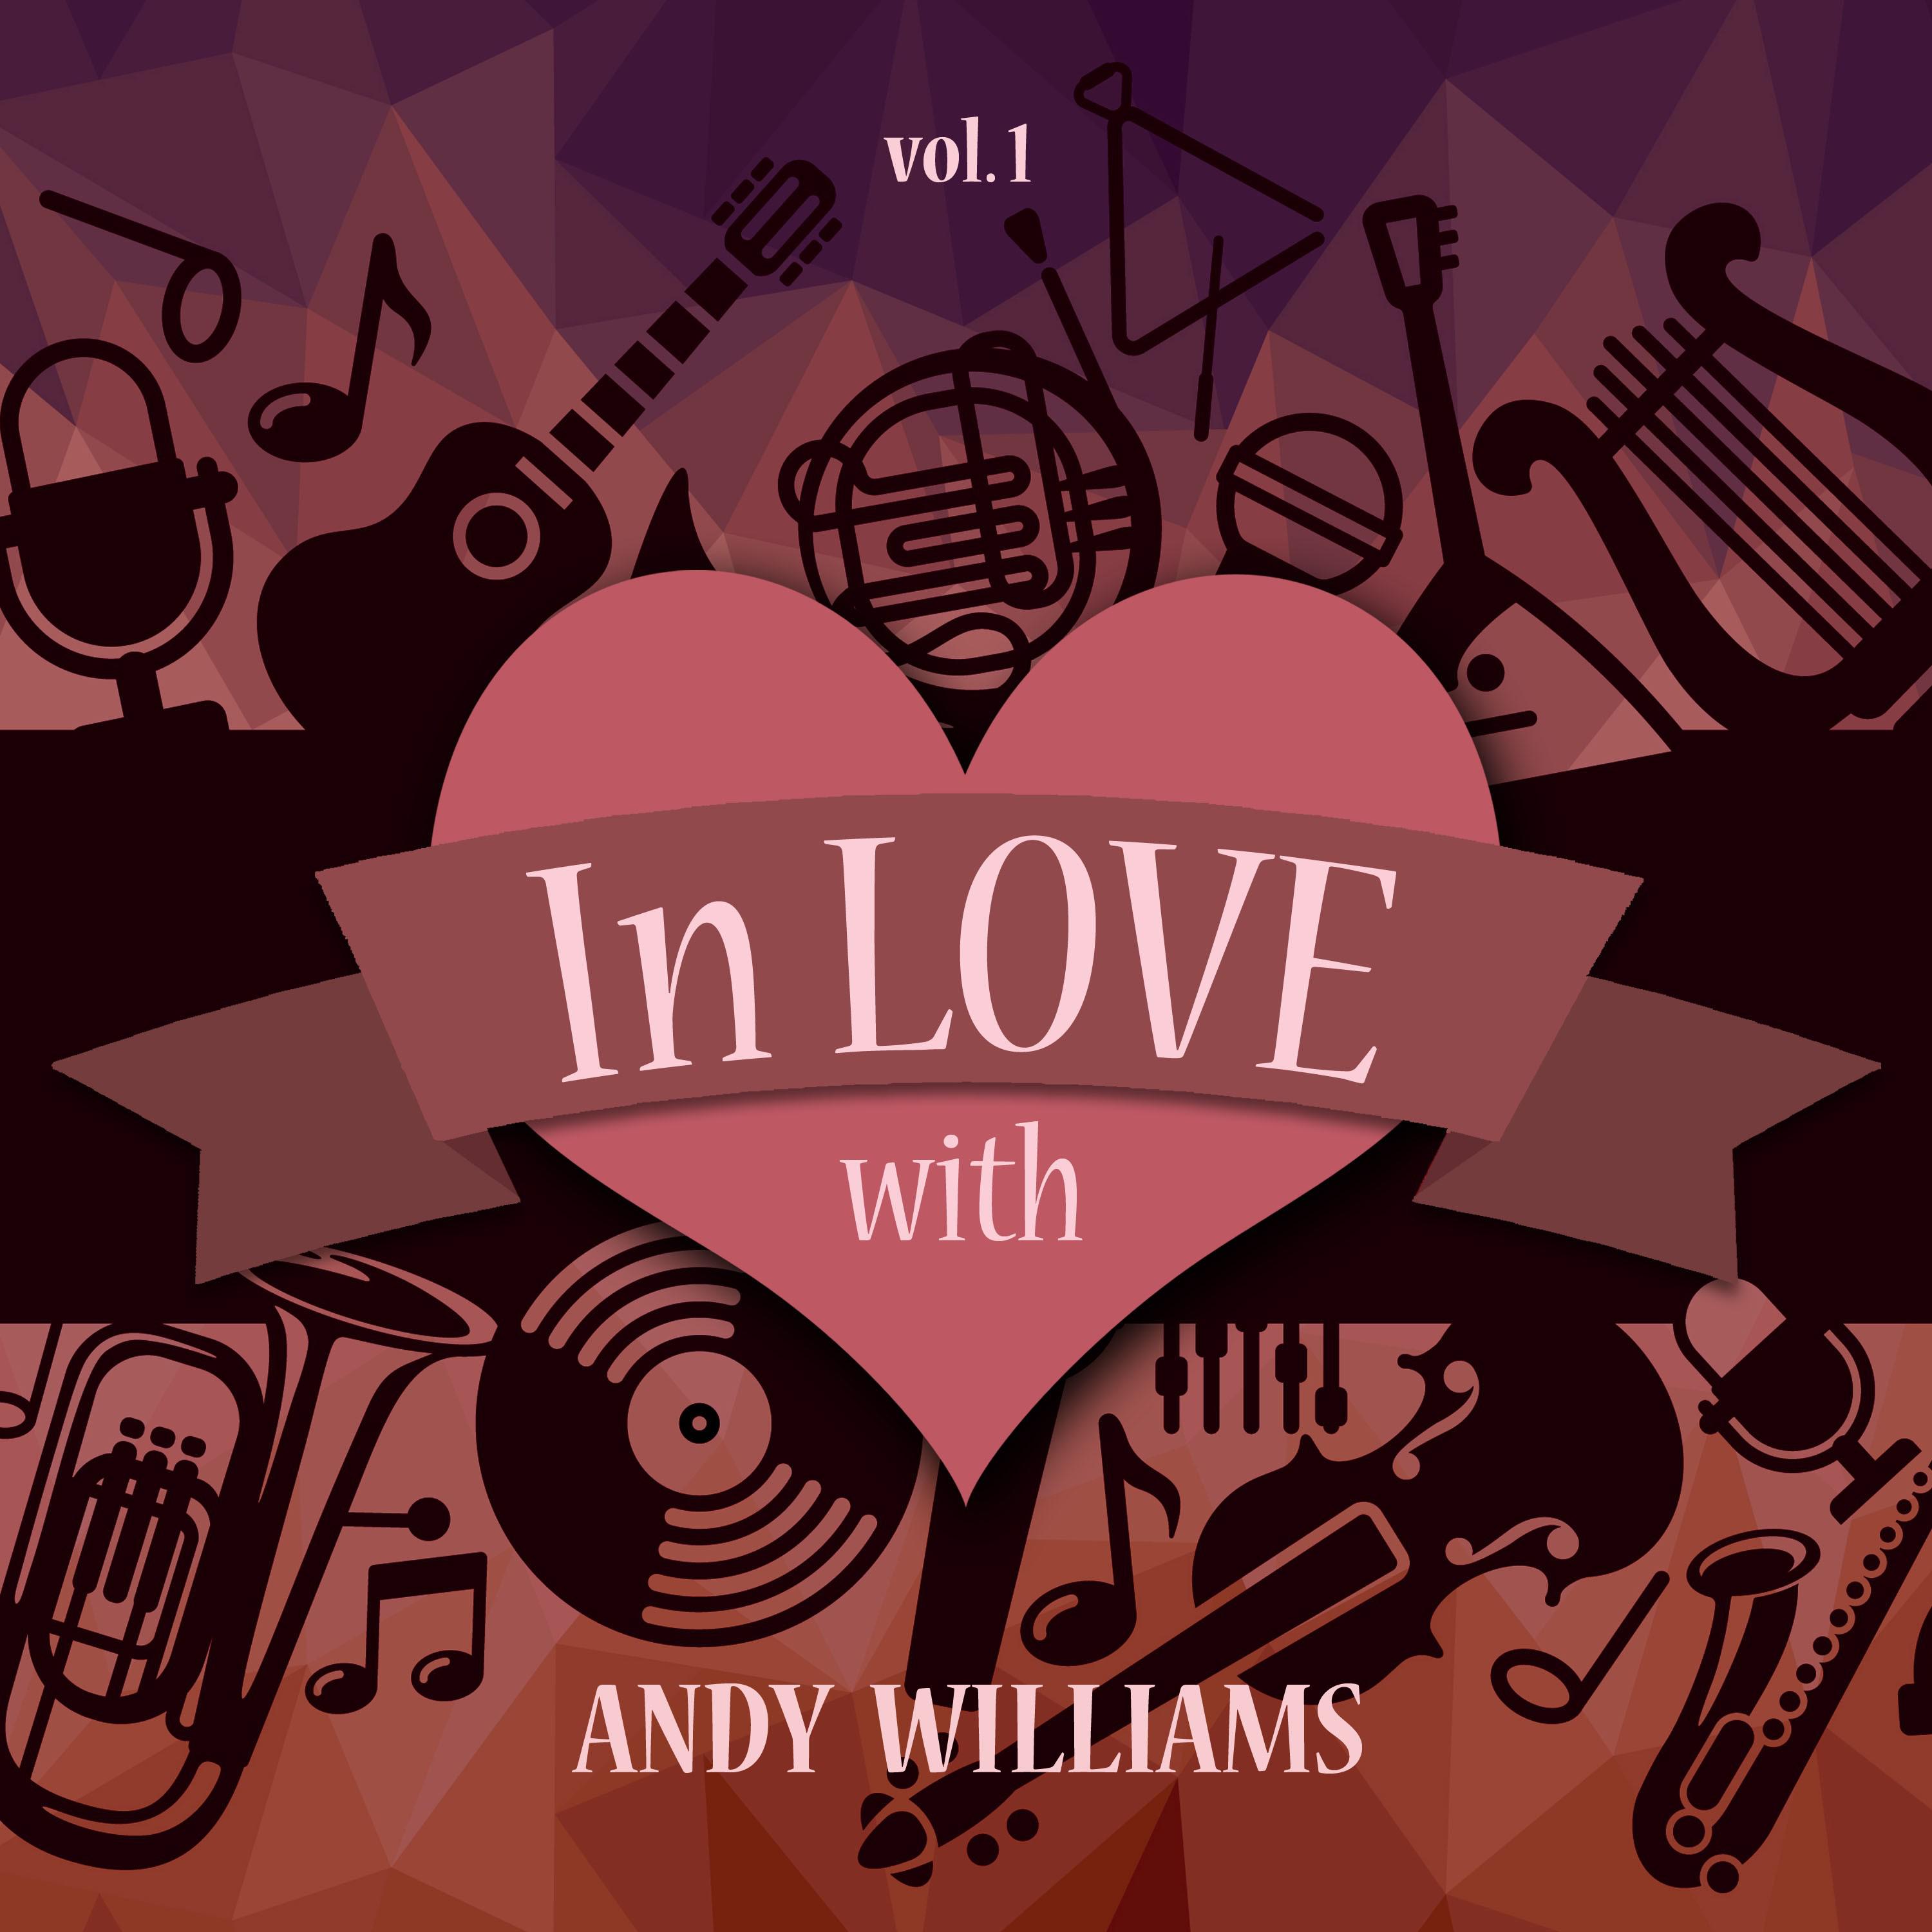 In Love with Andy Williams, Vol. 1